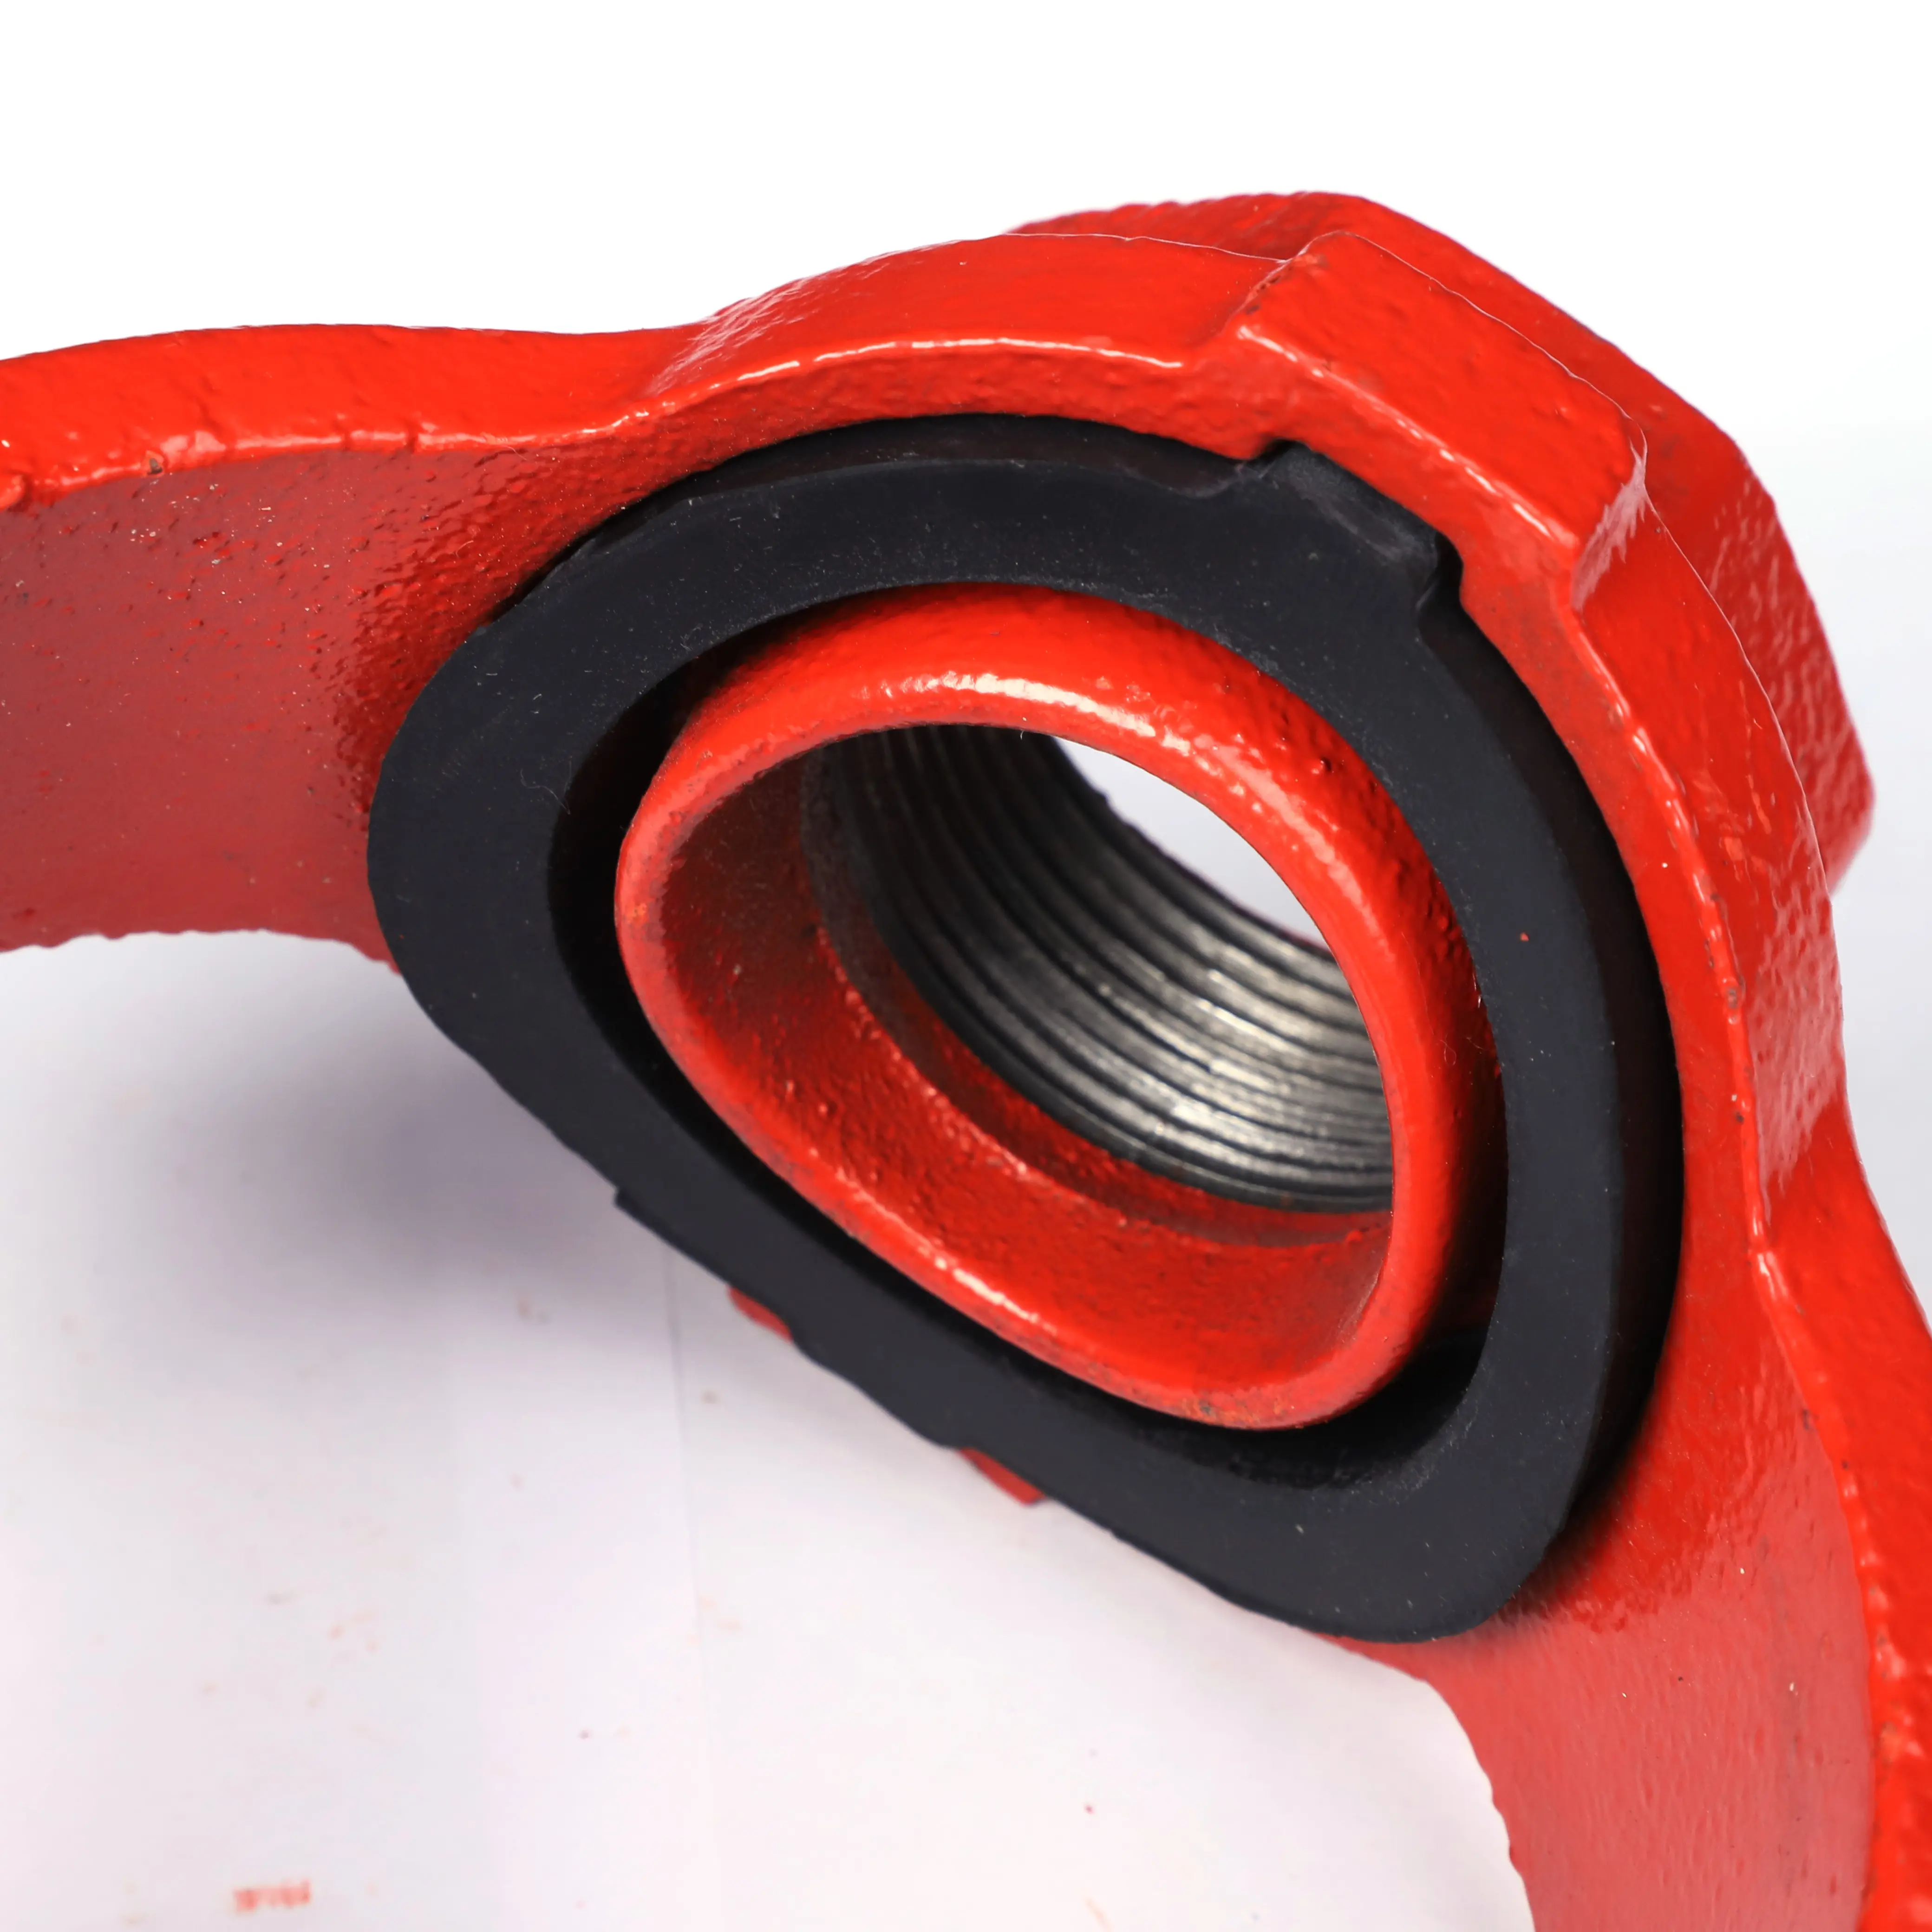 Elbow Ductile Iron Pipe Fittings Grooved Flange Reducing Coupling Ductile Iron Pipe Fittings